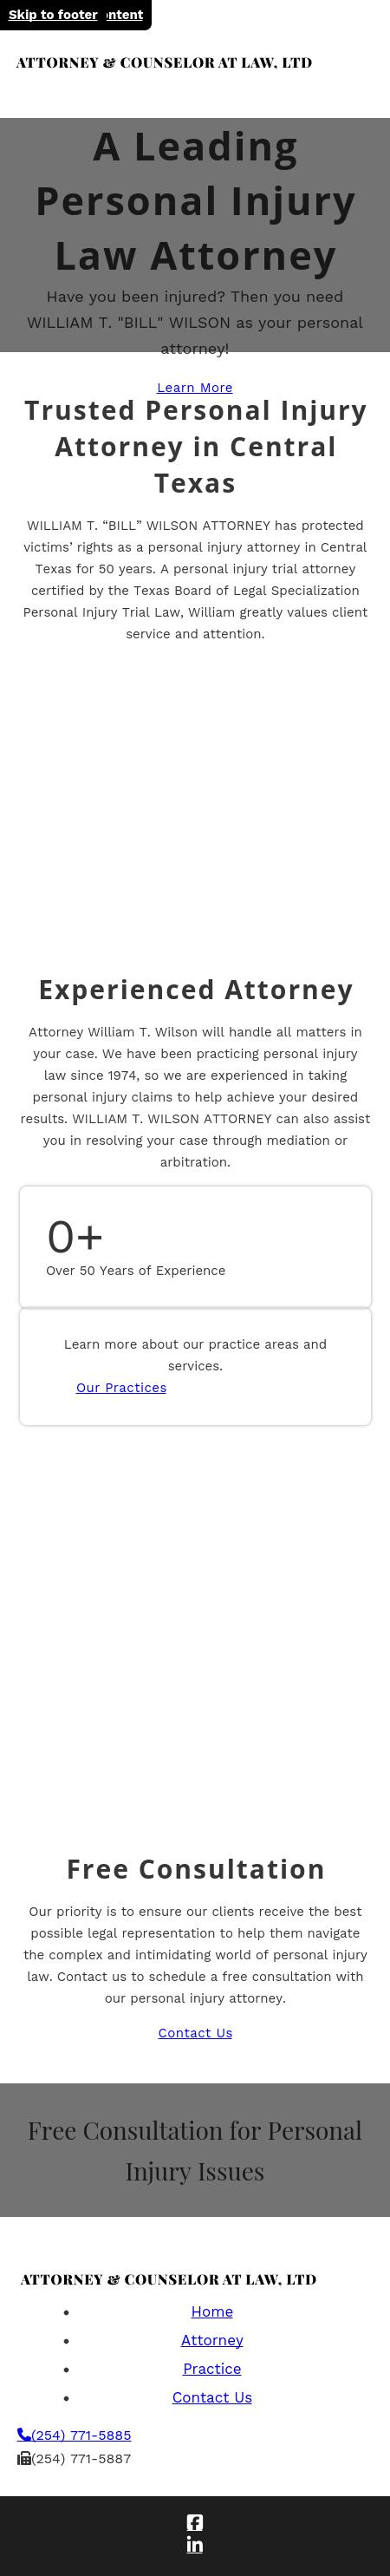 William T. Wilson Attorney & Counselor at Law - Temple TX Lawyers